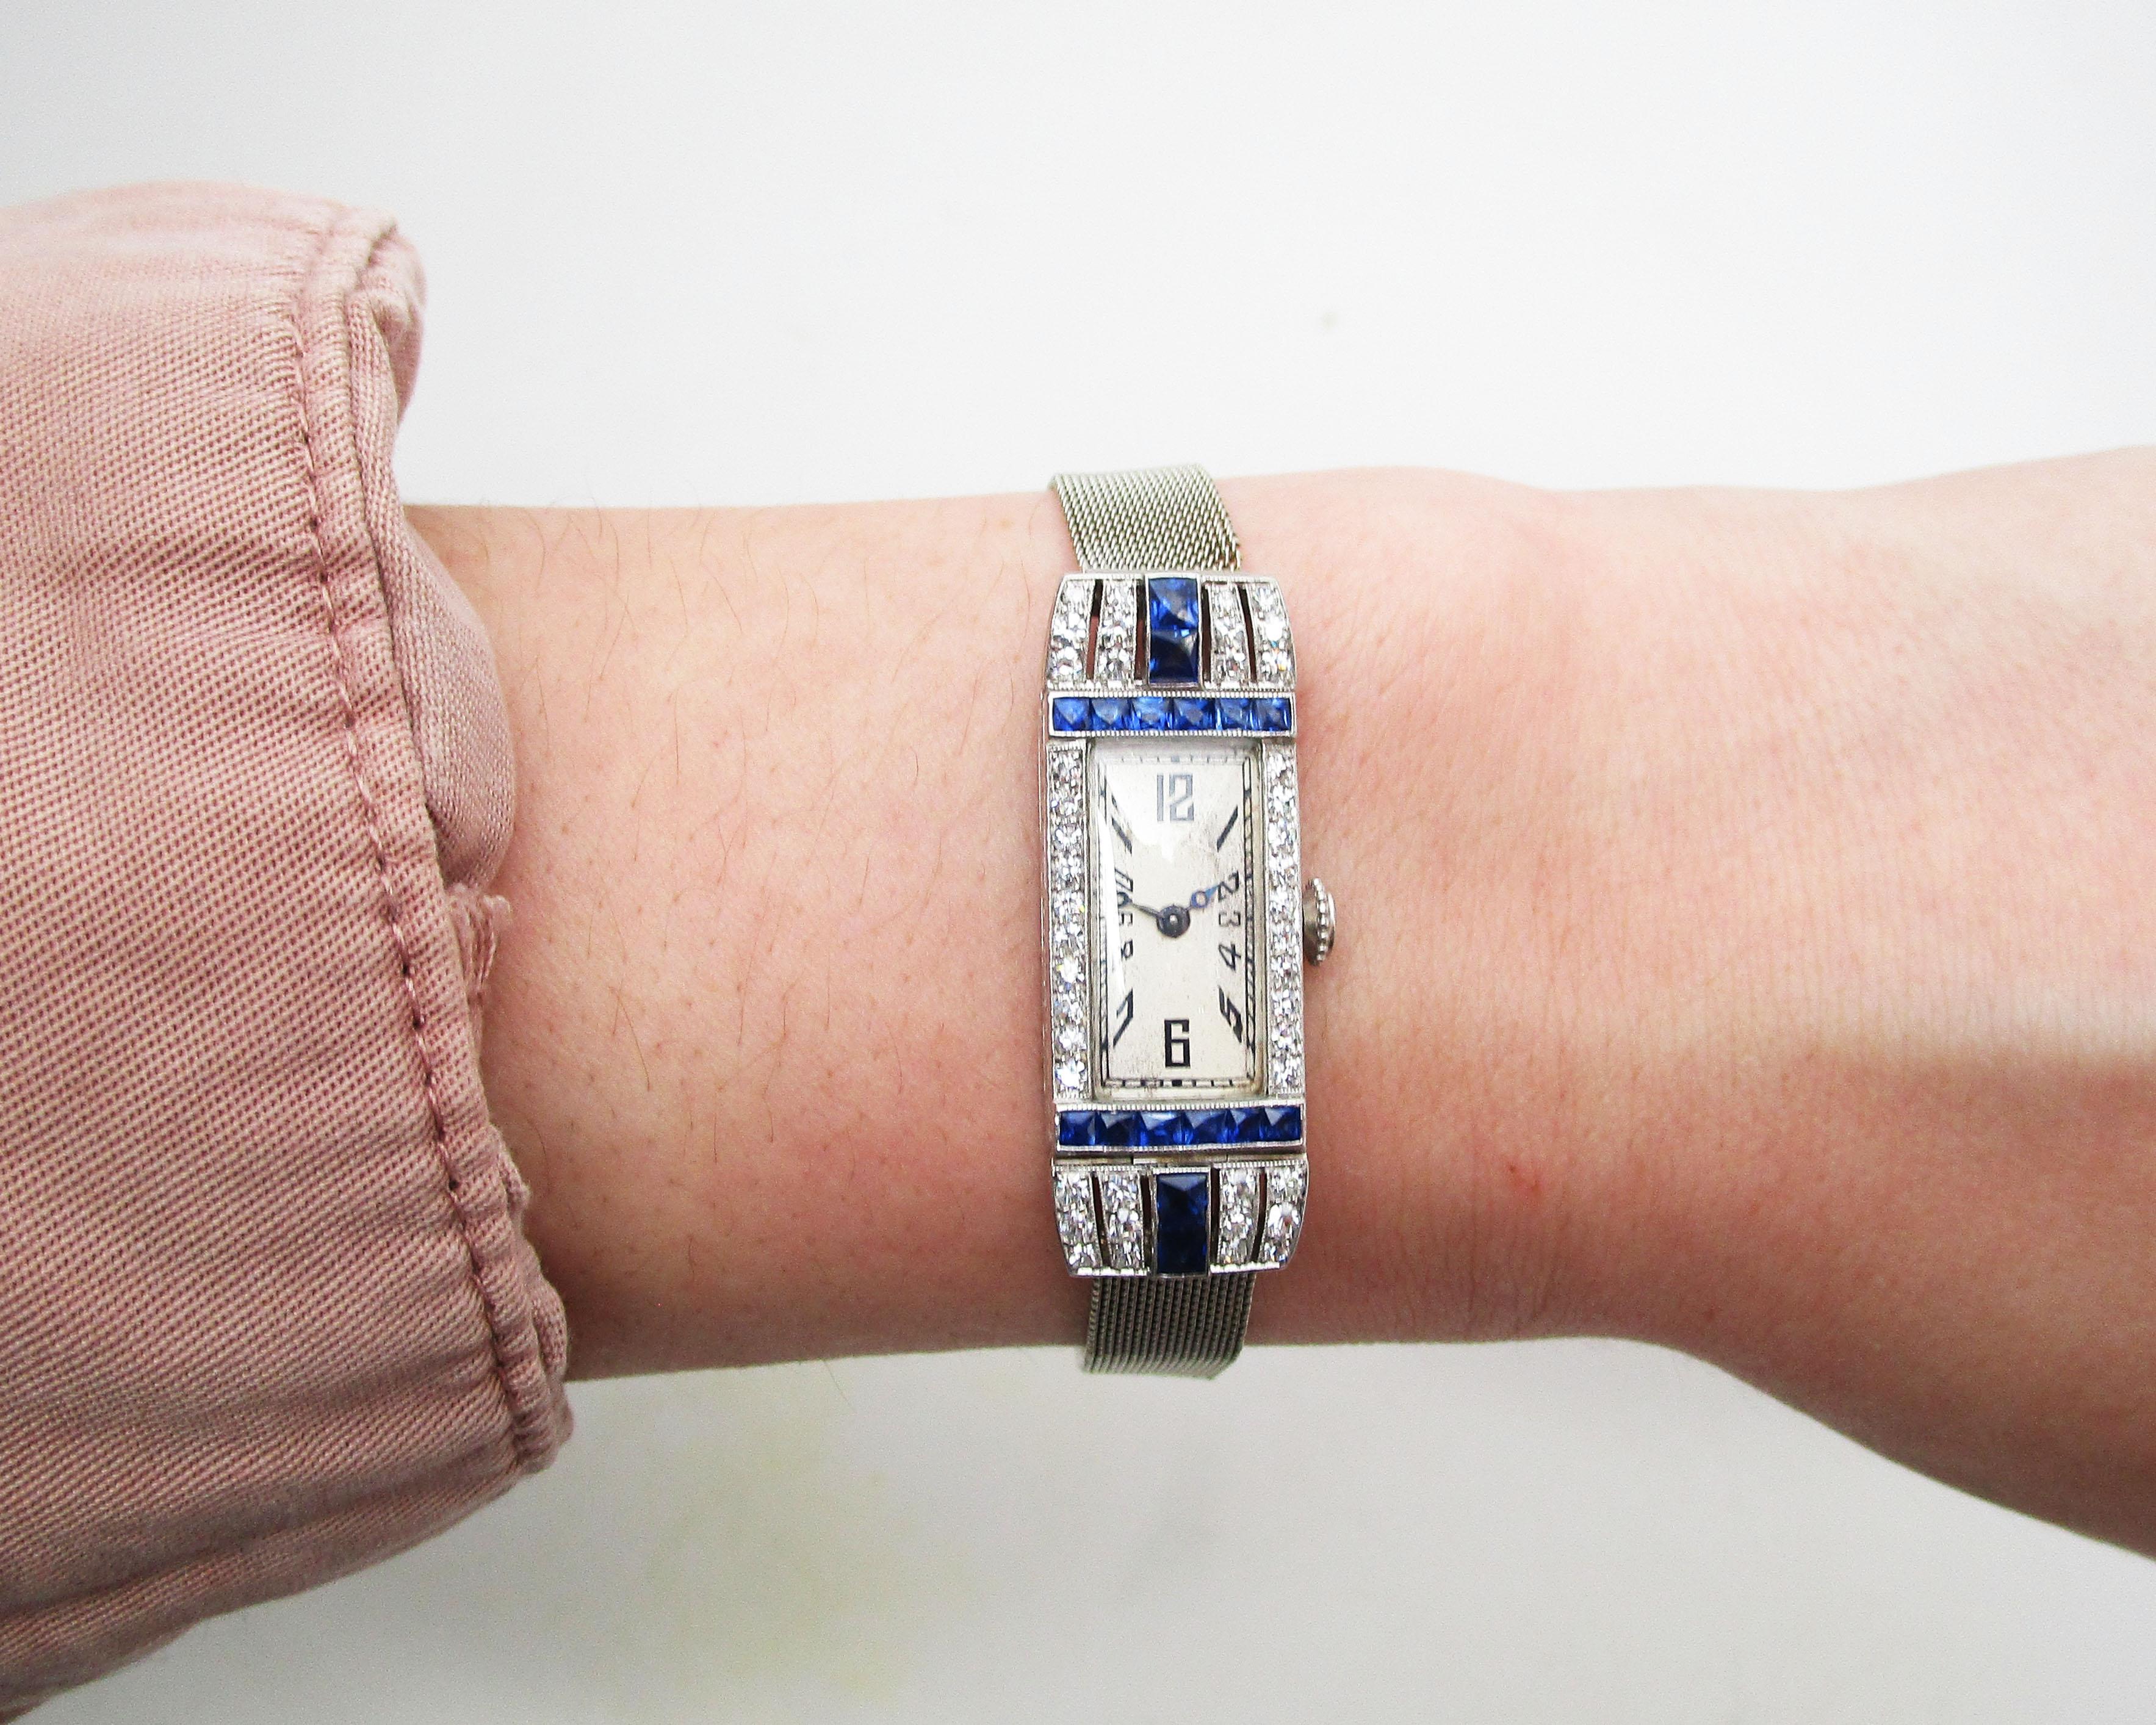 This is a breathtaking Art Deco watch with a platinum case set with sparkling white diamonds and royal blue calibre sapphires paired with a flexible mesh 18k white gold strap. This watch truly defines Deco with its long layout and strong geometric